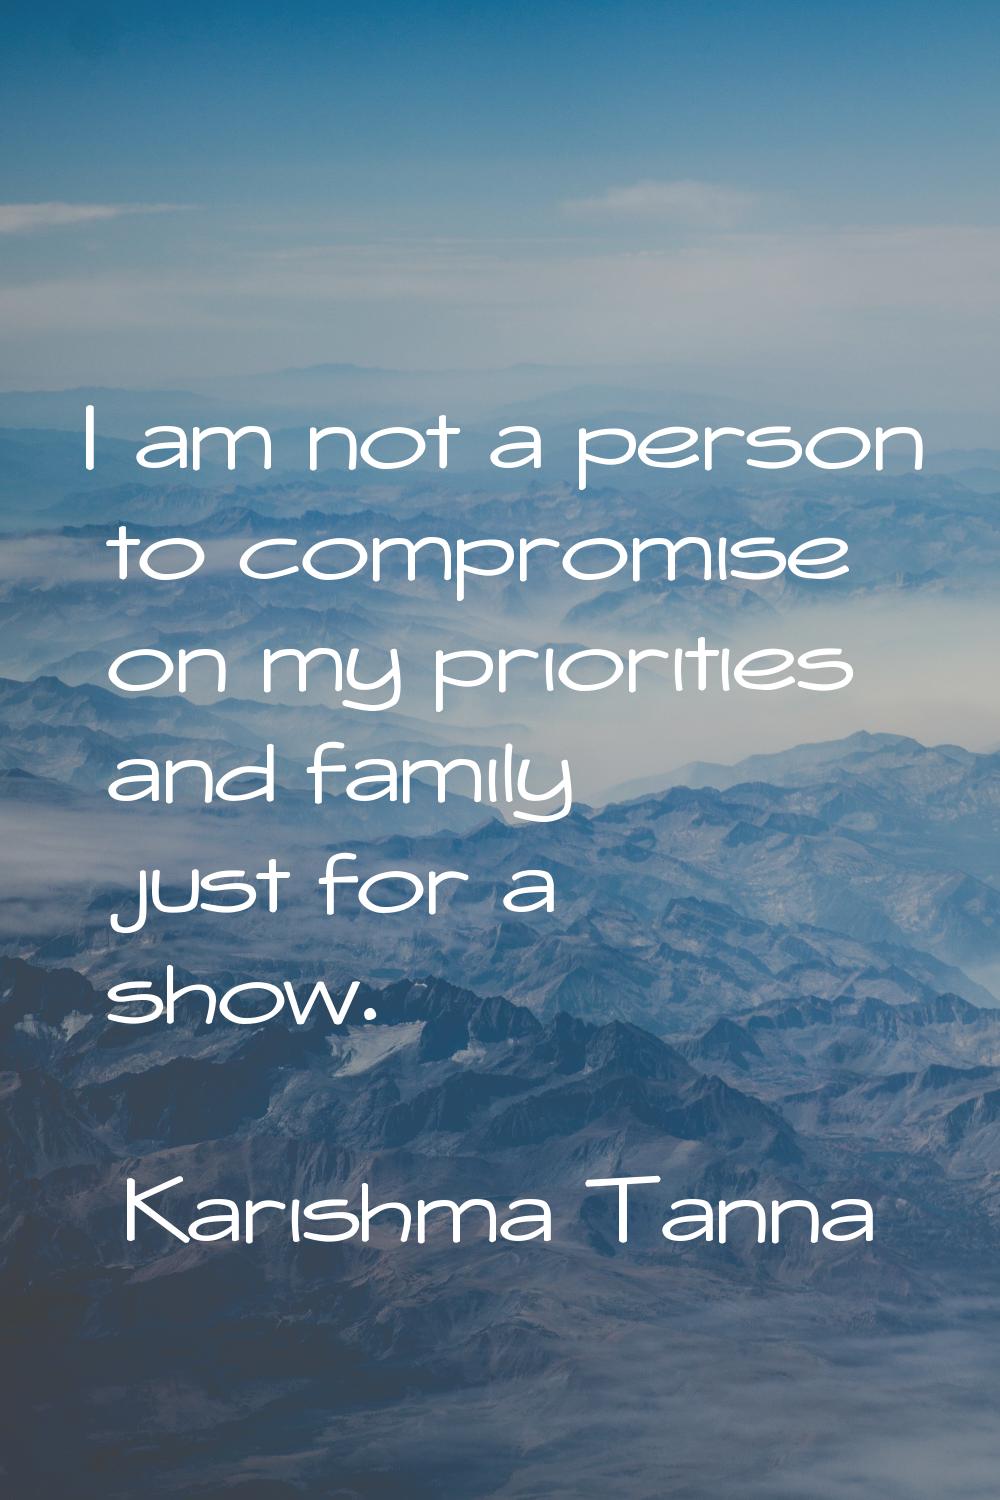 I am not a person to compromise on my priorities and family just for a show.